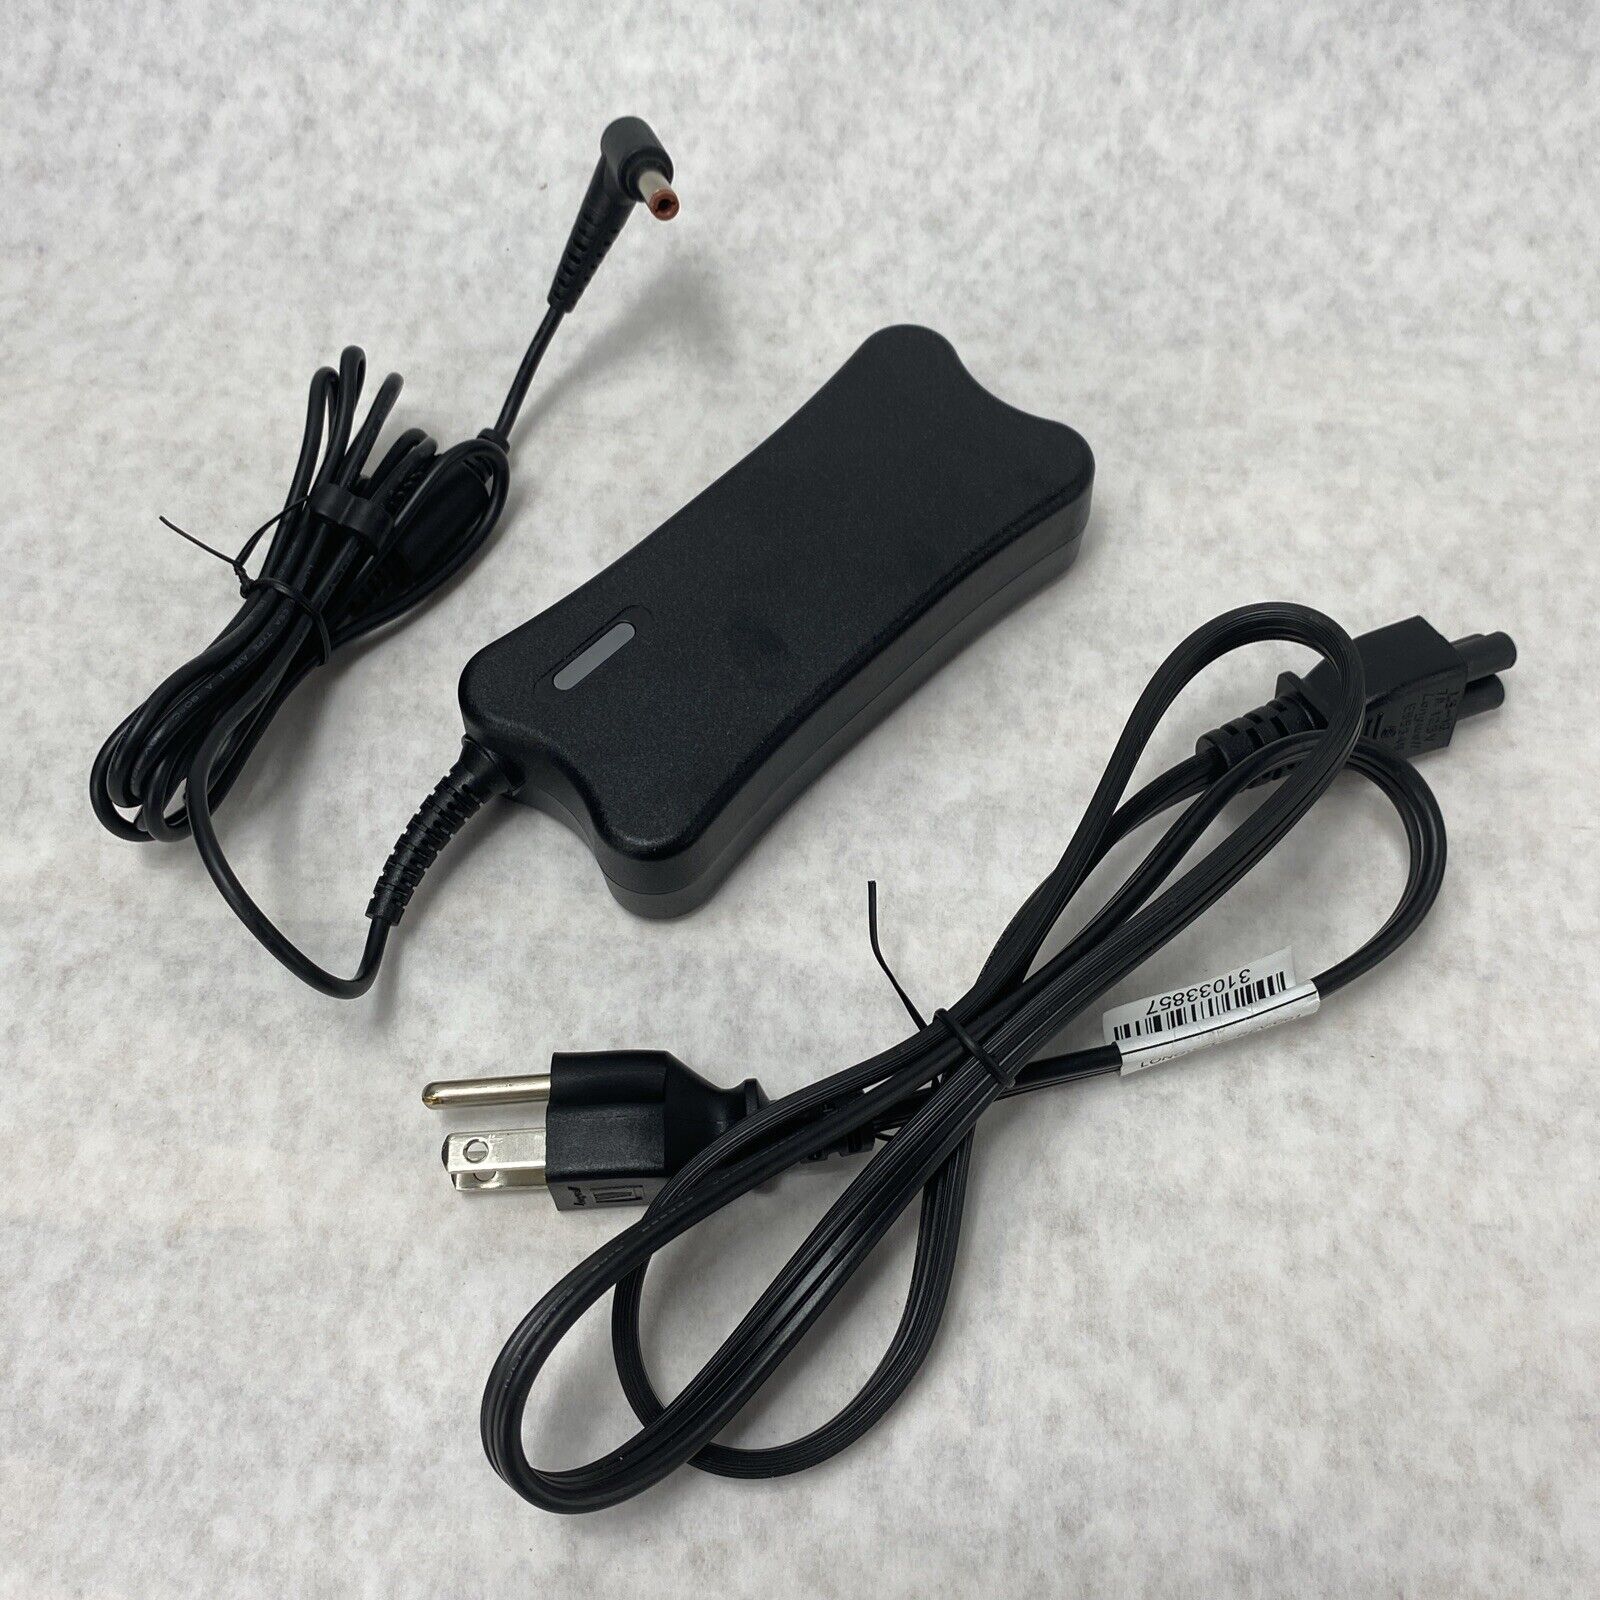 Genuine Lenovo ADP-65YB D 65W 20V 3.25A AC/DC Adapter Laptop Charger